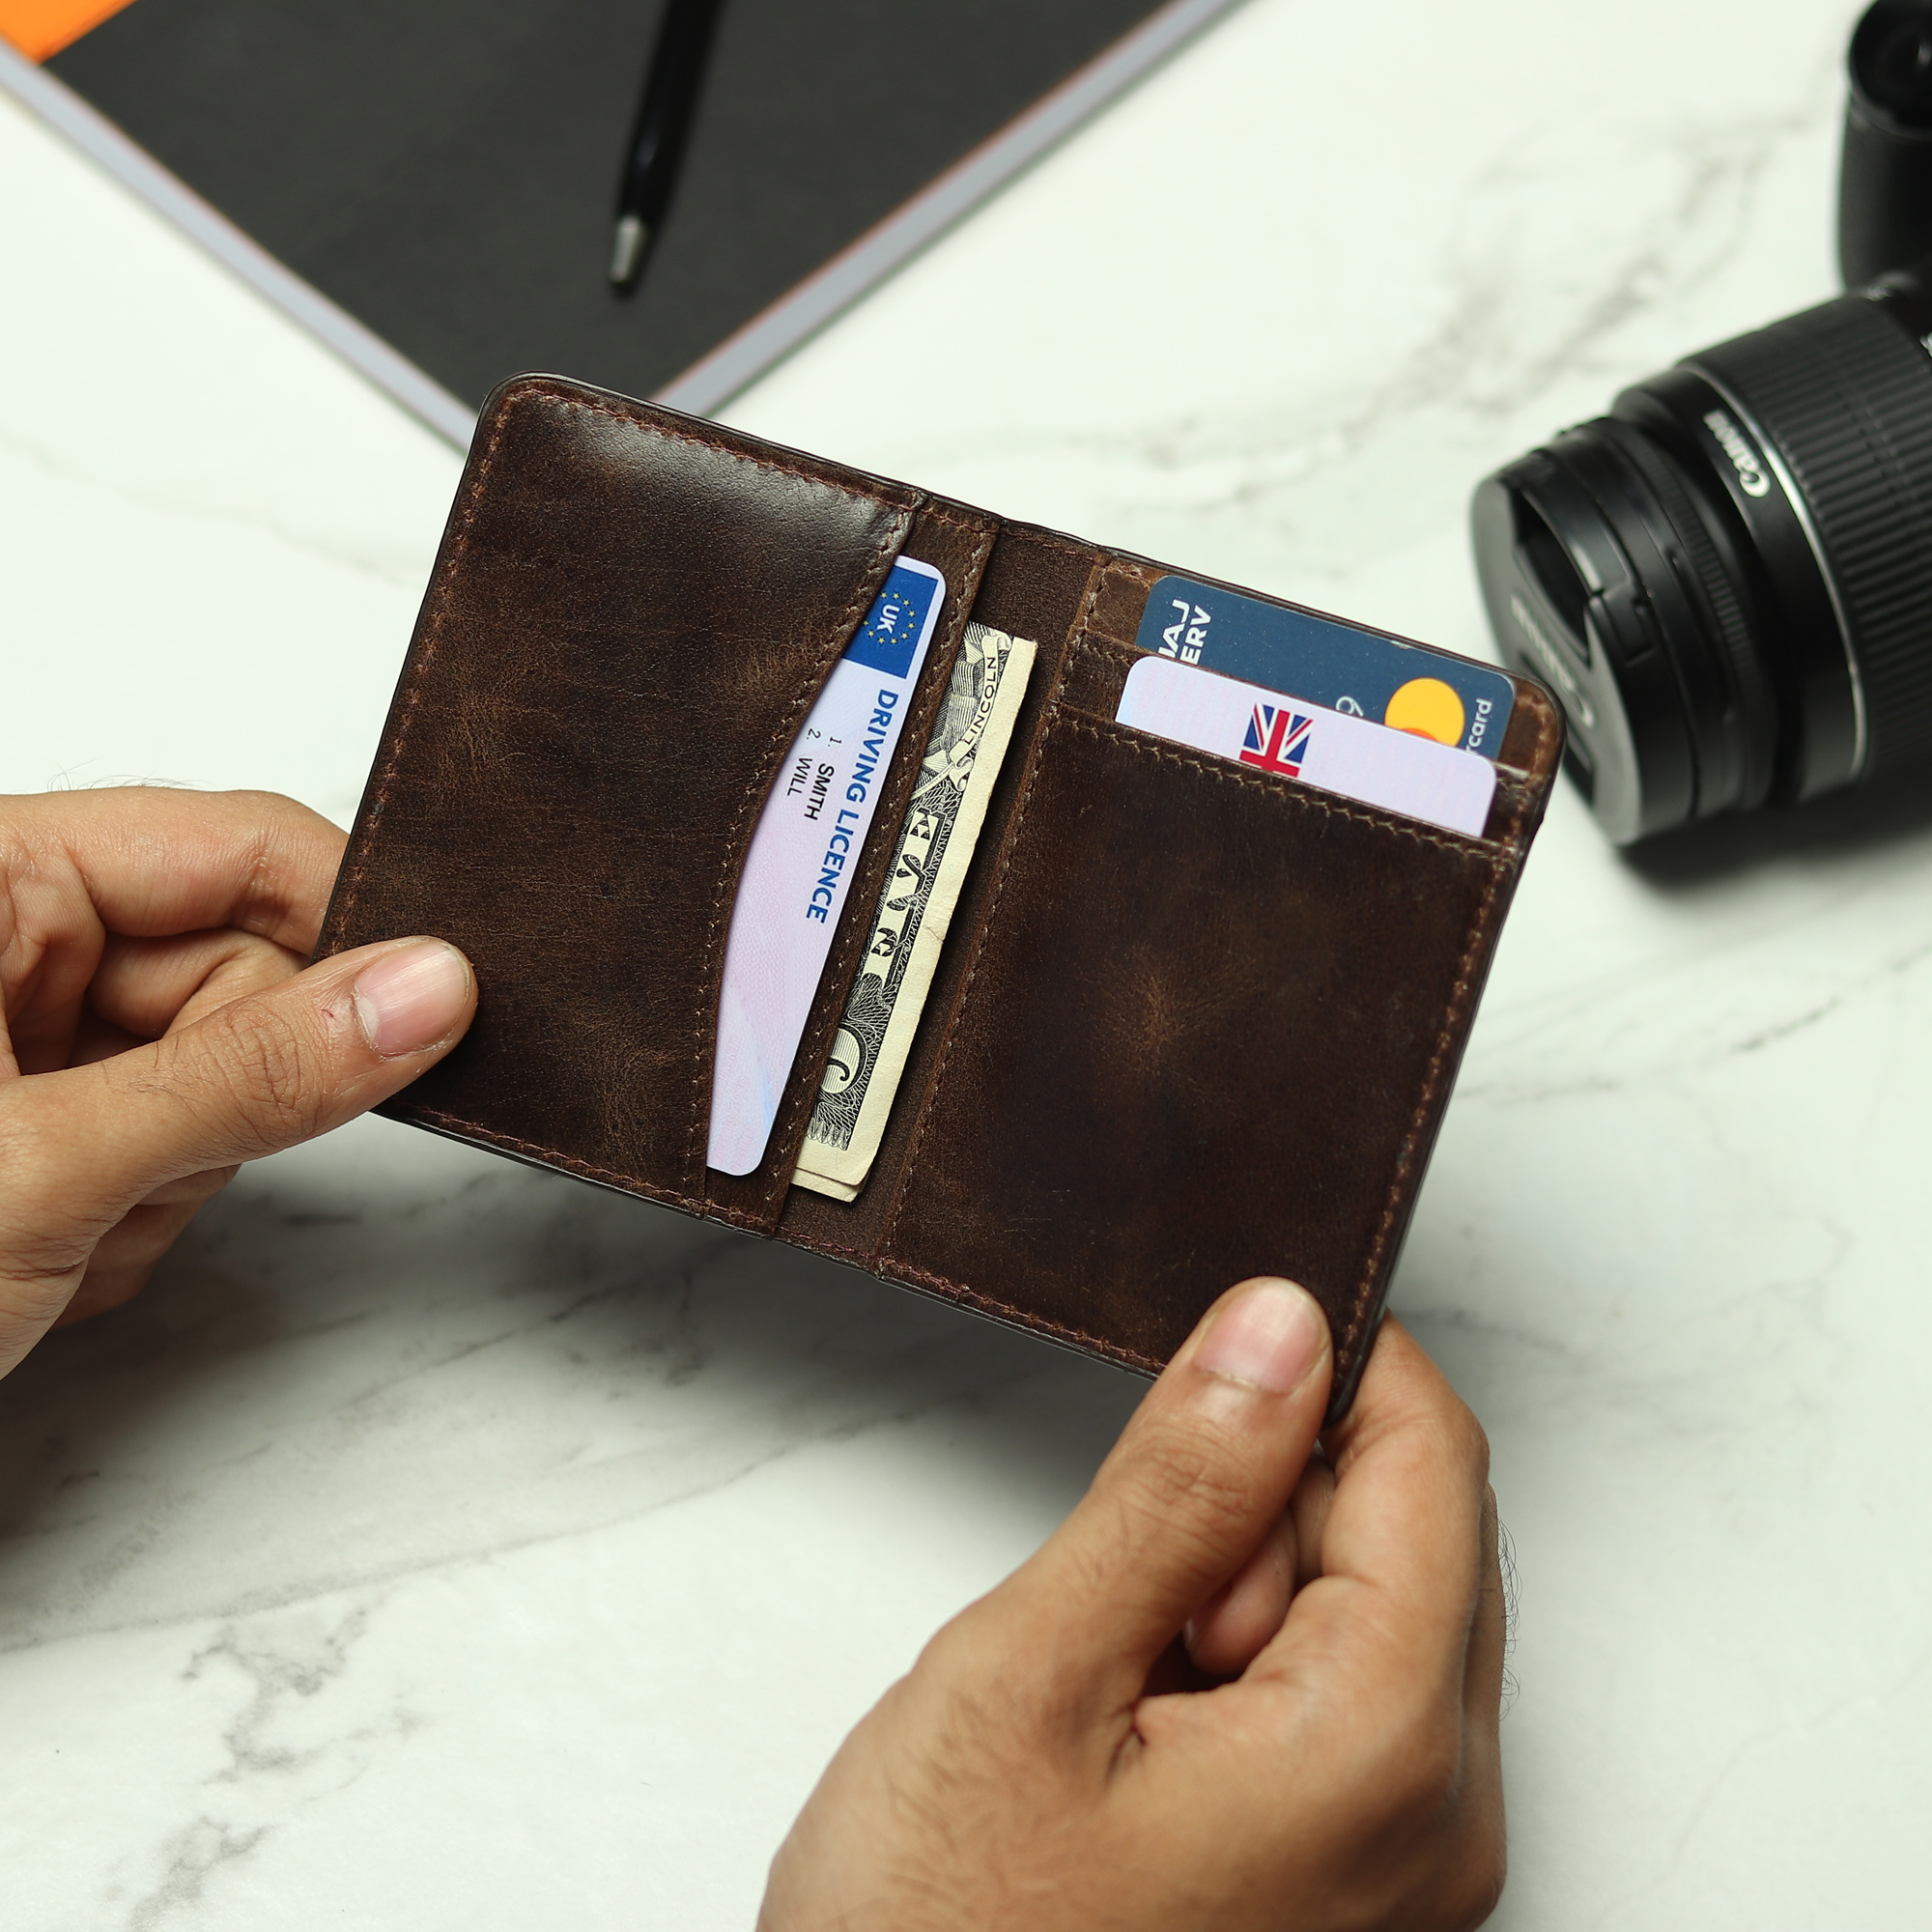 Men's Wallets And Card Holders